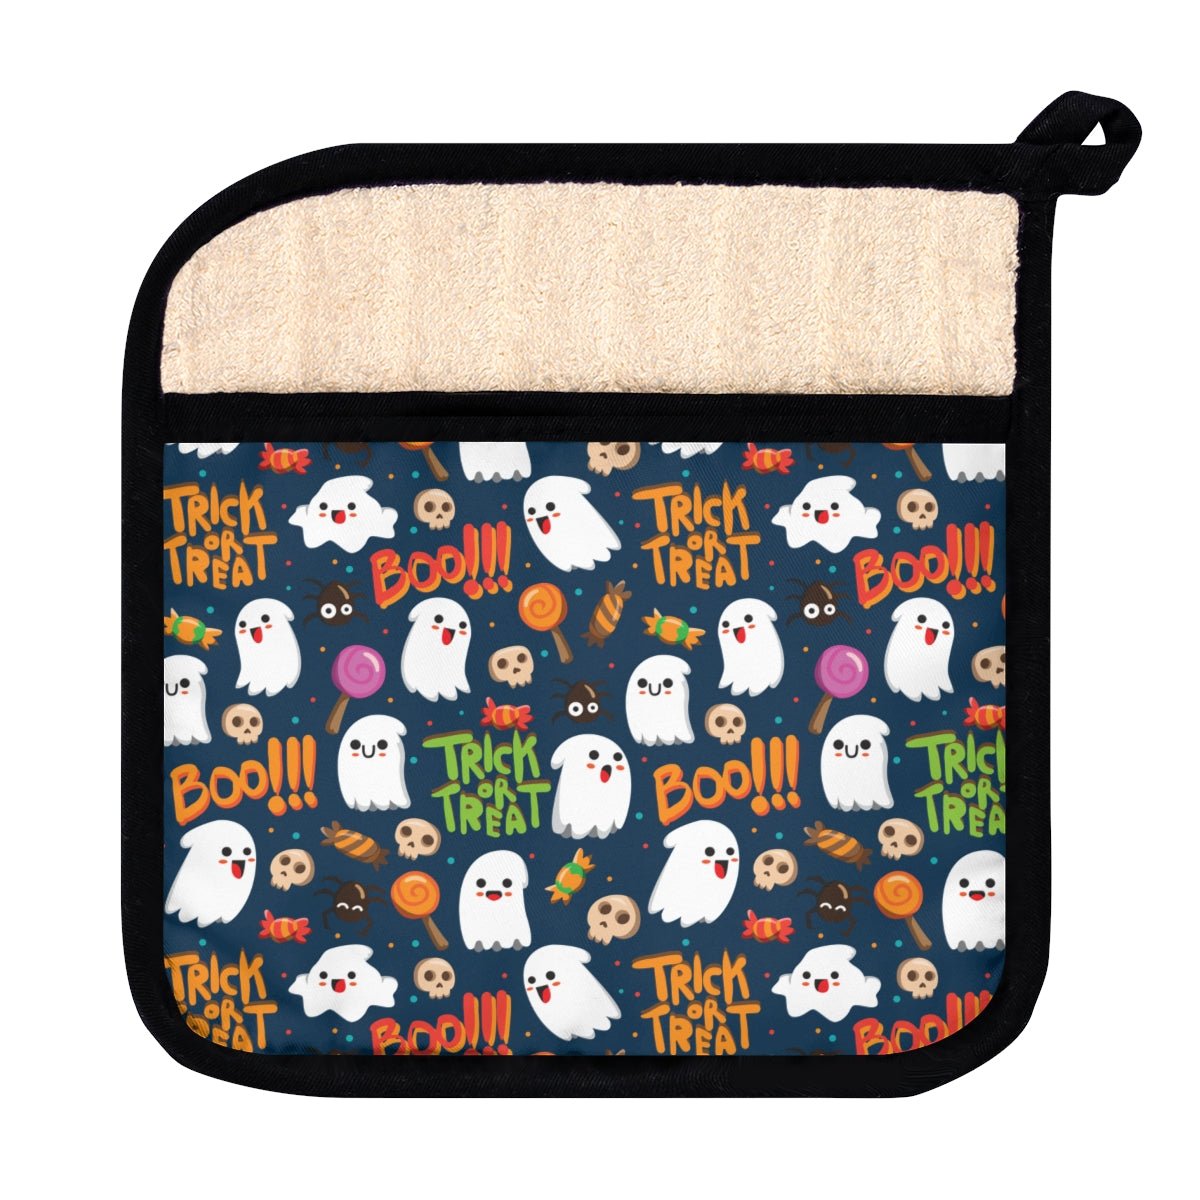 Trick or Treat Ghosts Pot Holder with Pocket - Puffin Lime